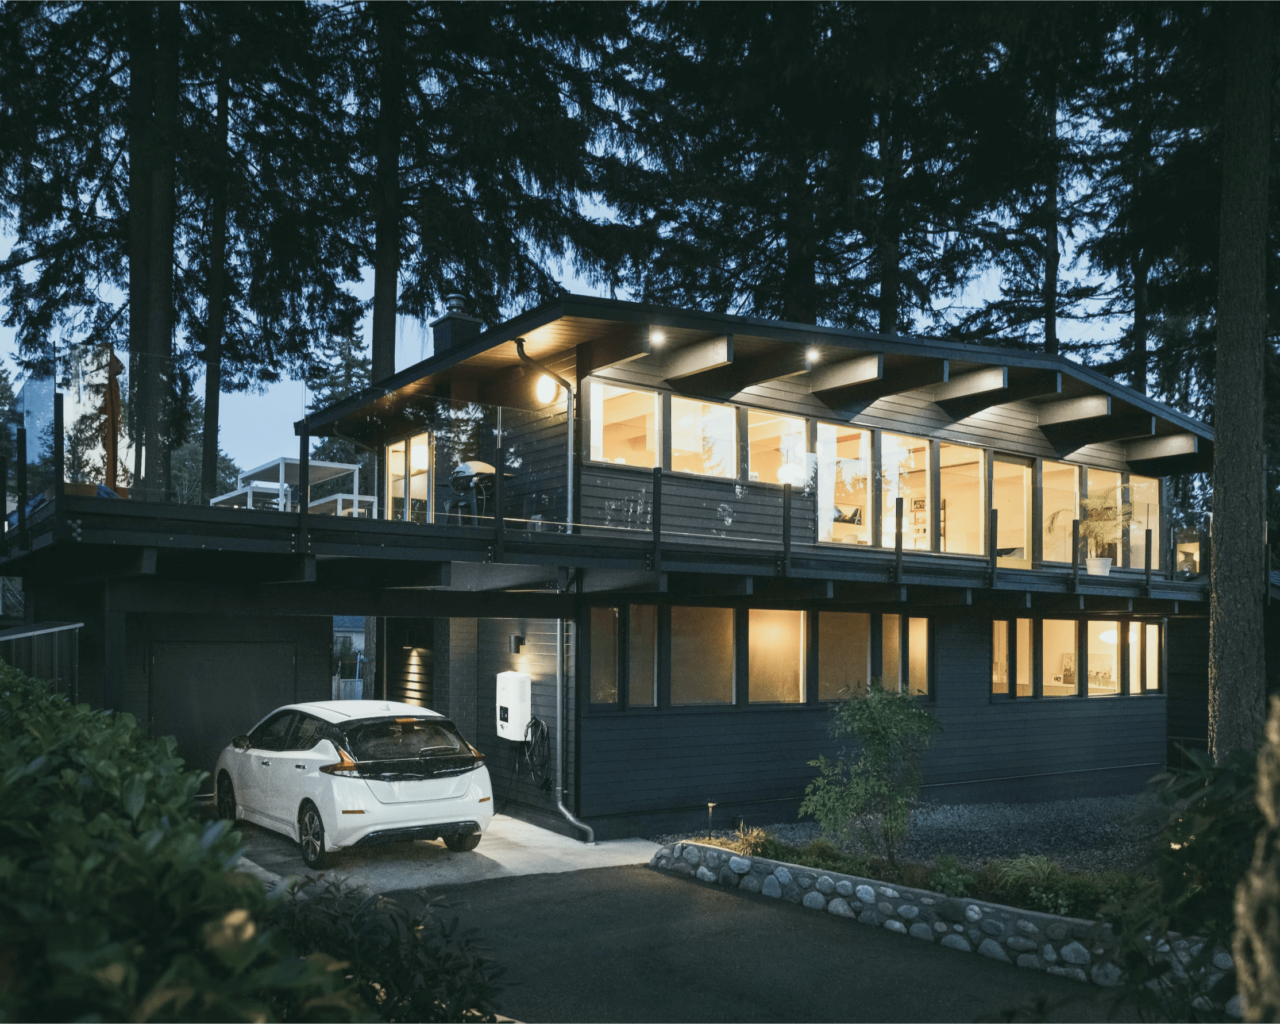 Modern home surround by forest with an electric charging station in the car port